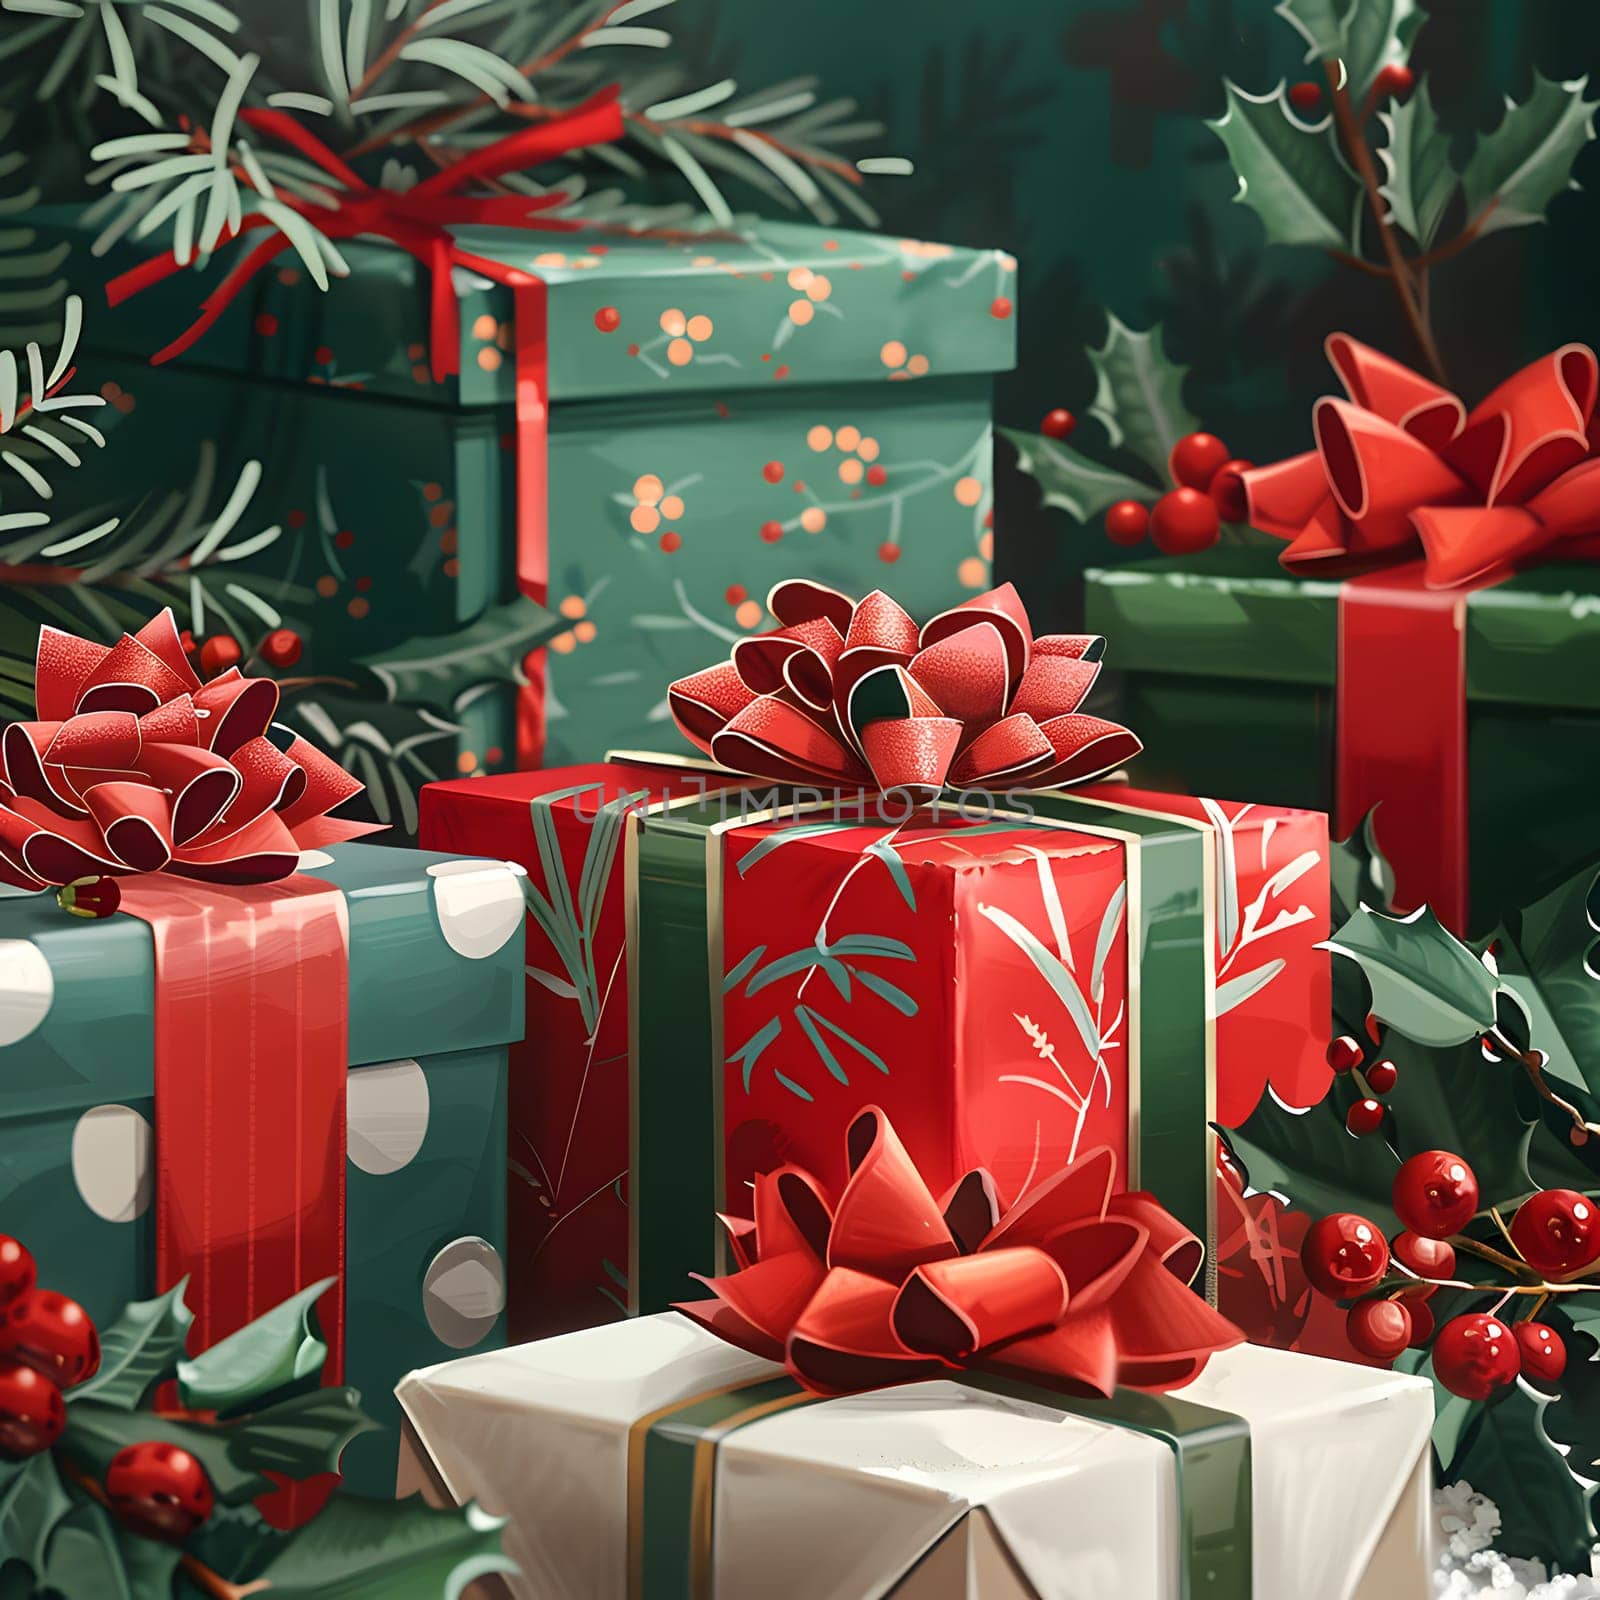 Green, red Christmas presents with bows, a festive sight by Nadtochiy